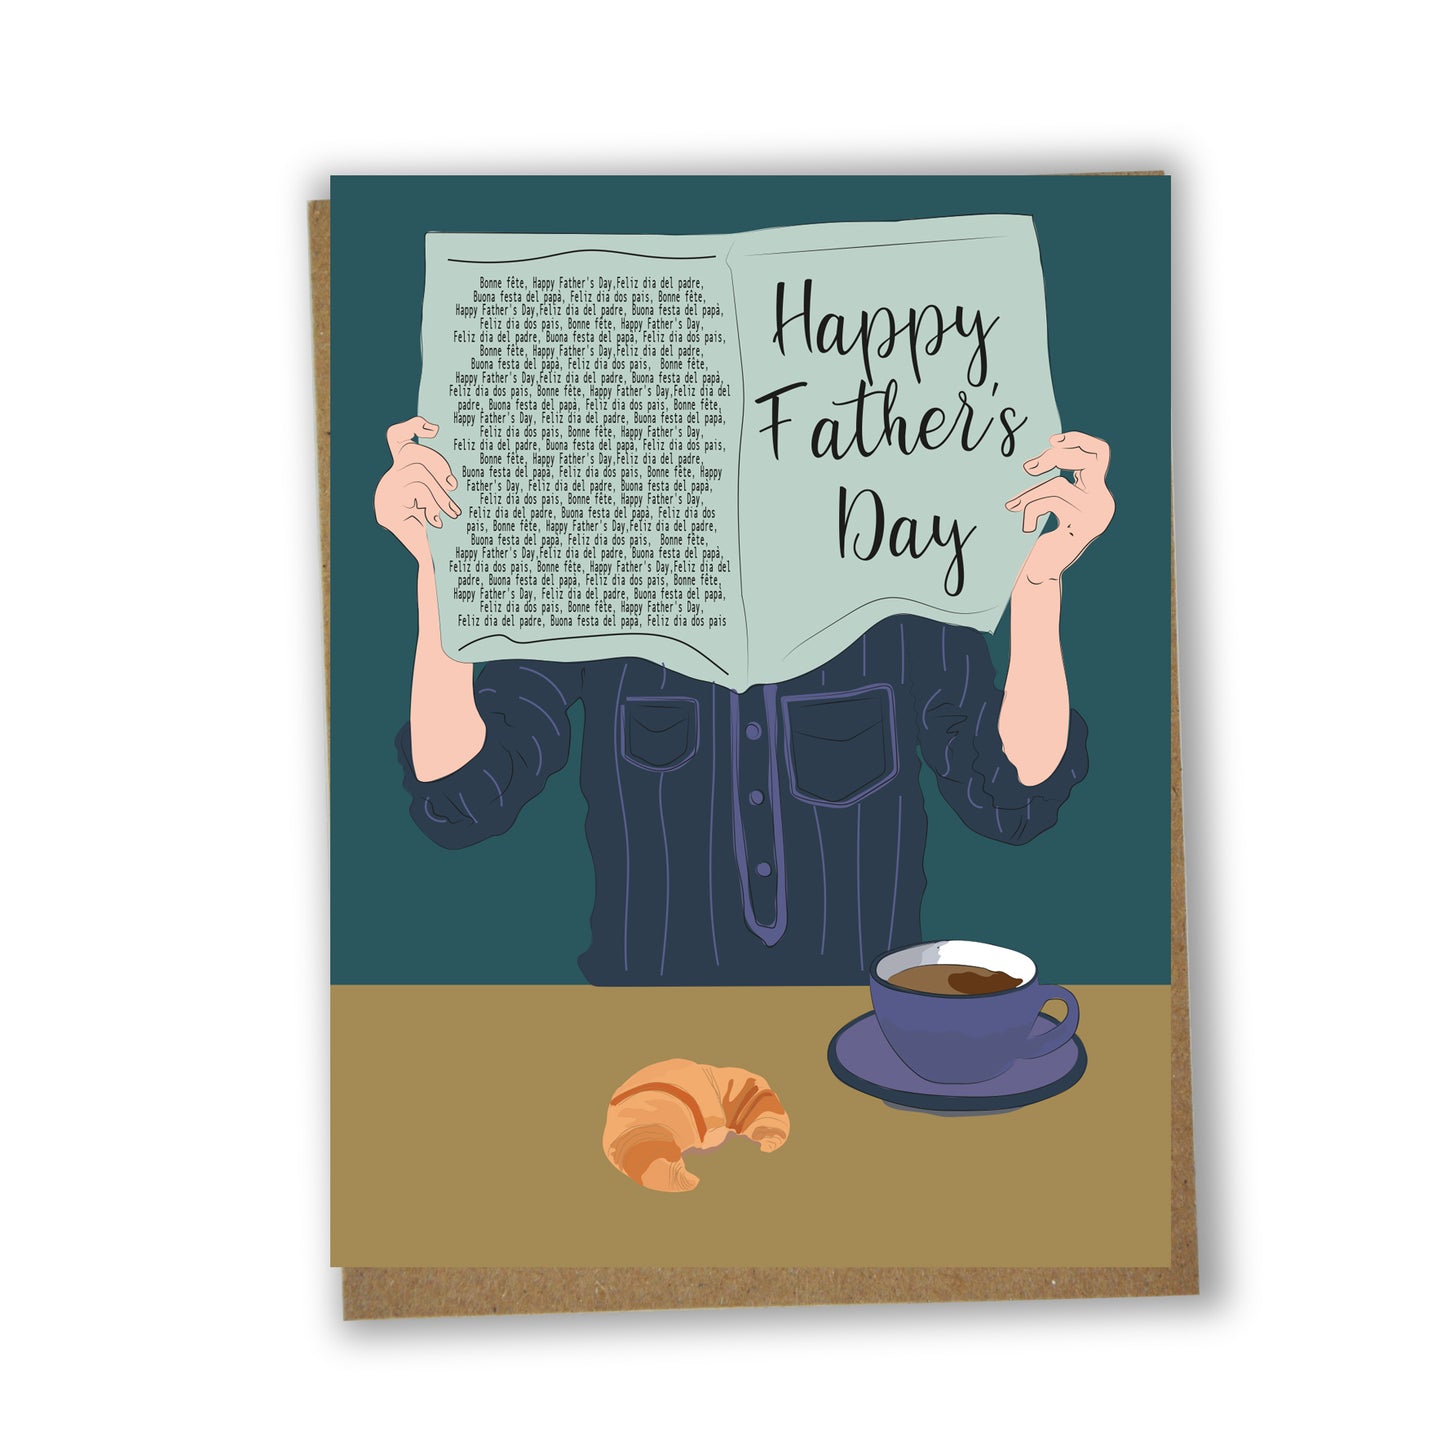 Happy Father's Day - journal